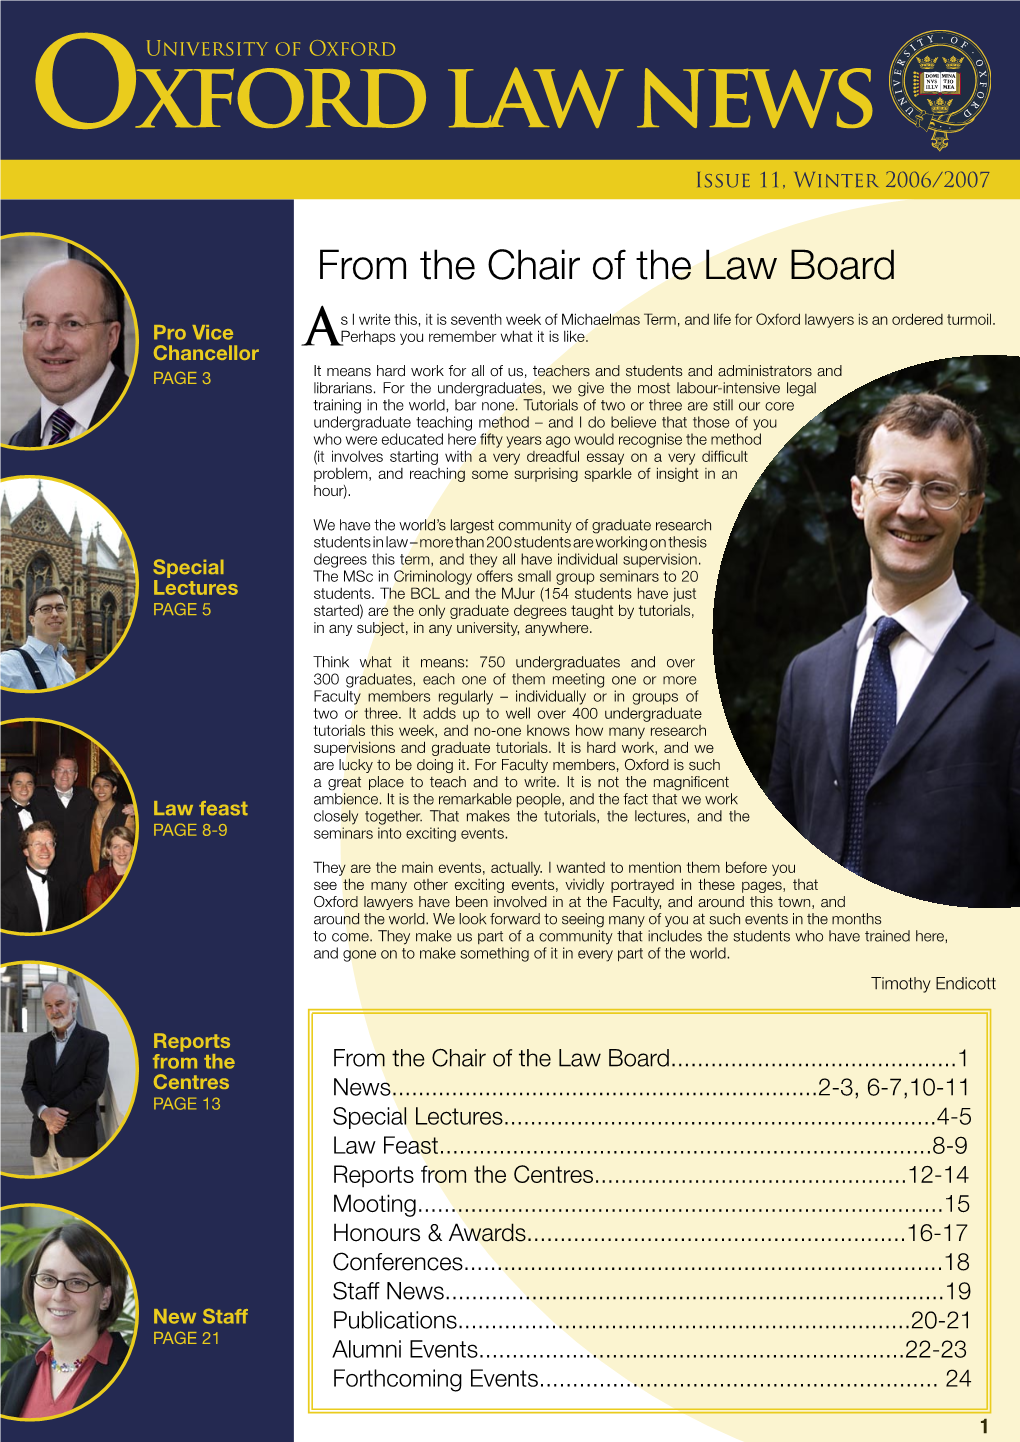 Oxford Law News Issue 11, Winter 2006/2007